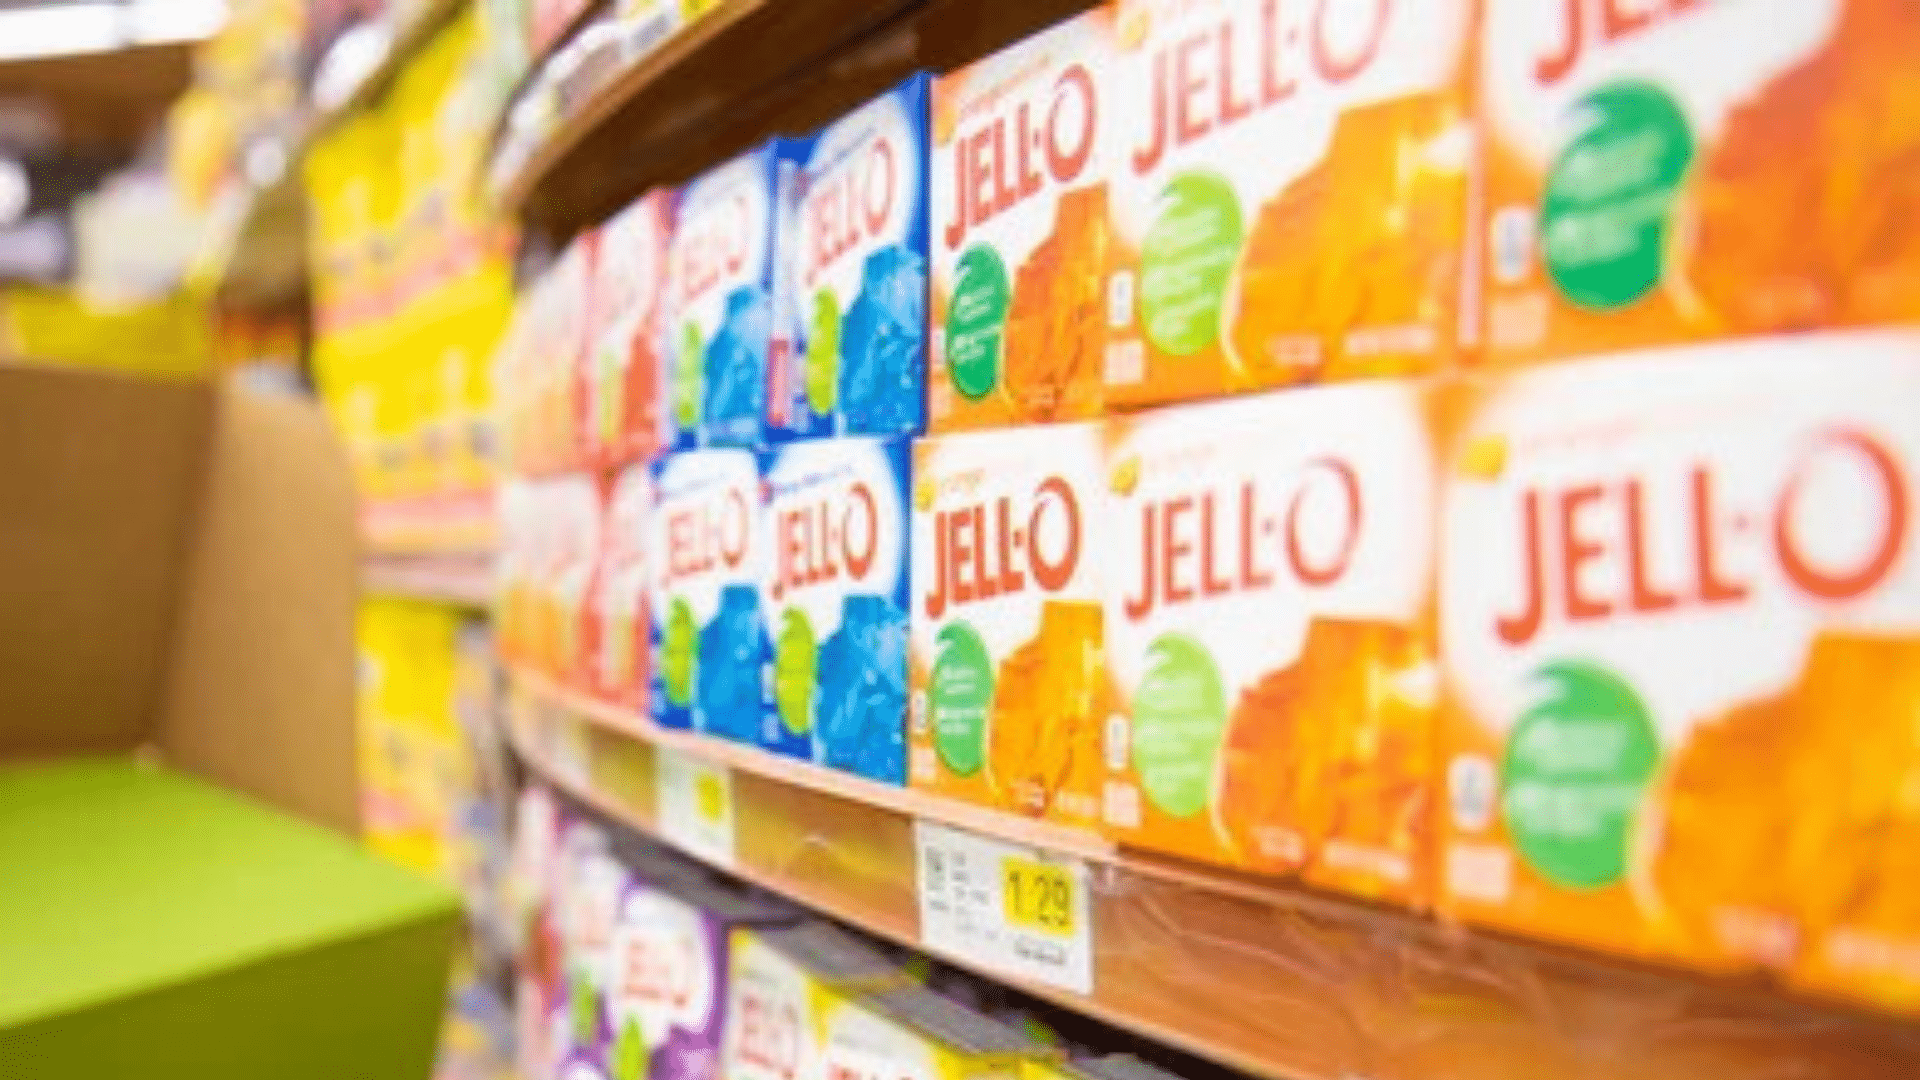 Jell-O Instant Pudding Price